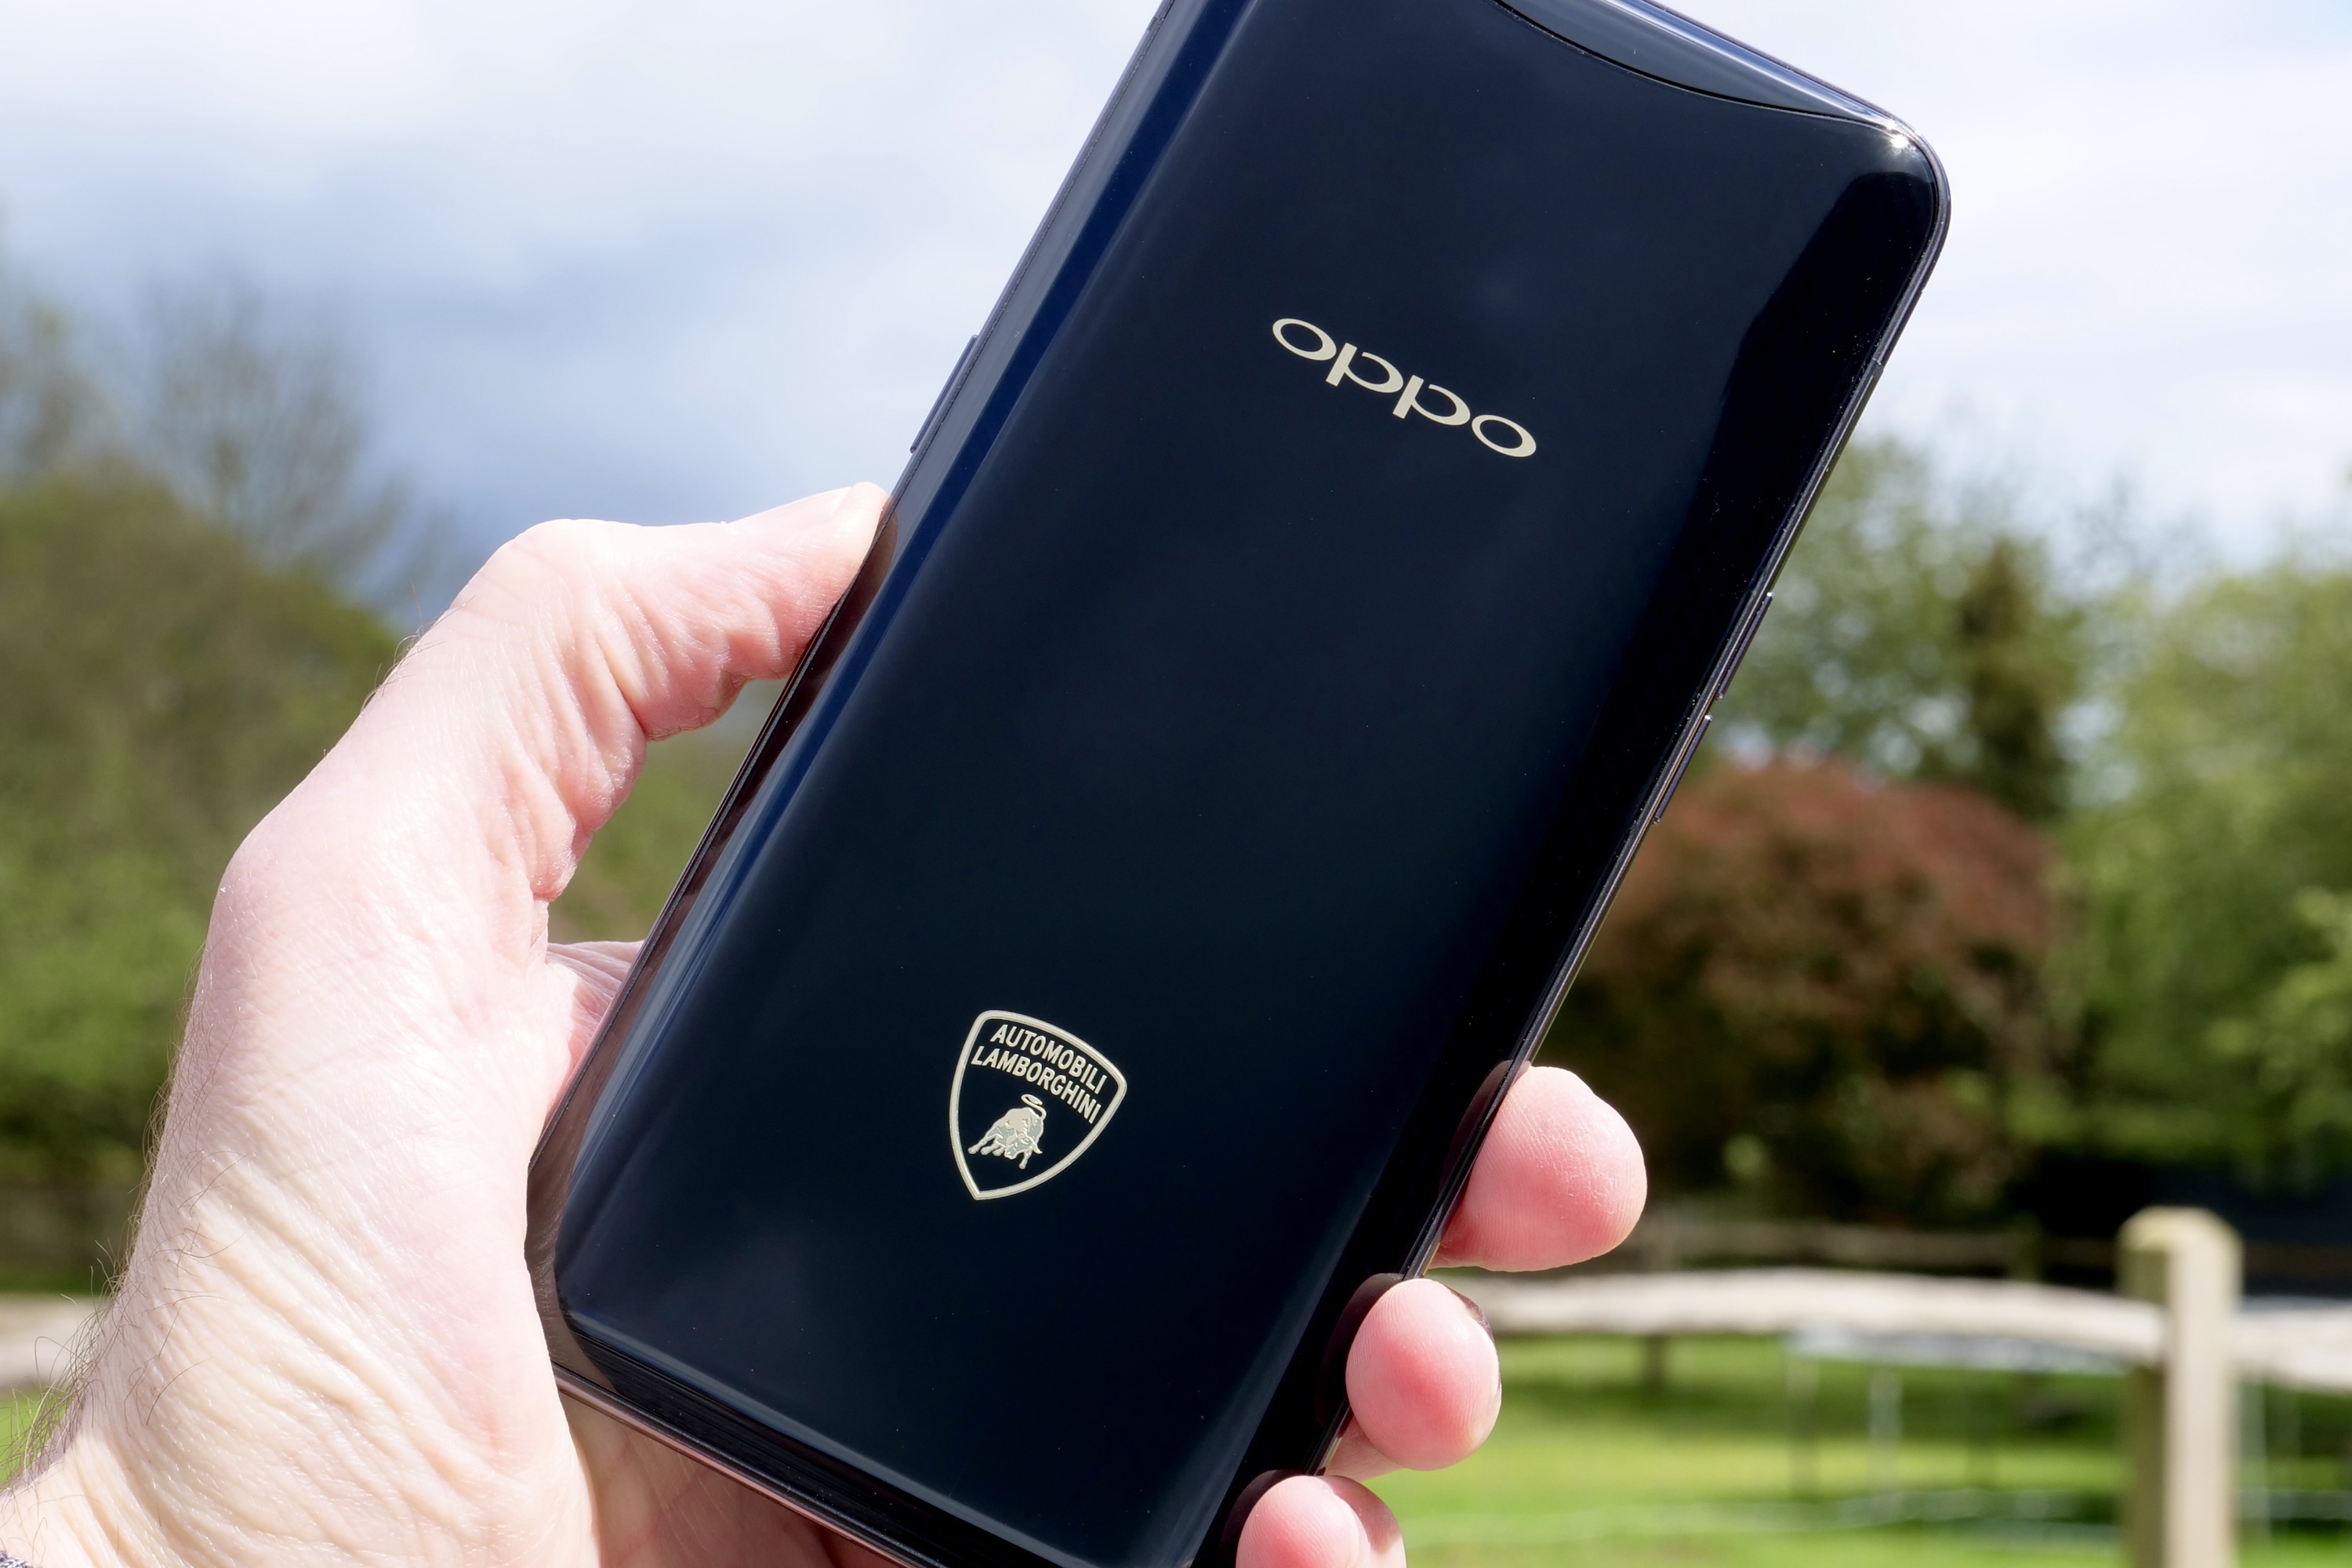 Remember when Lamborghini put its name on this cool phone? | Digital Trends